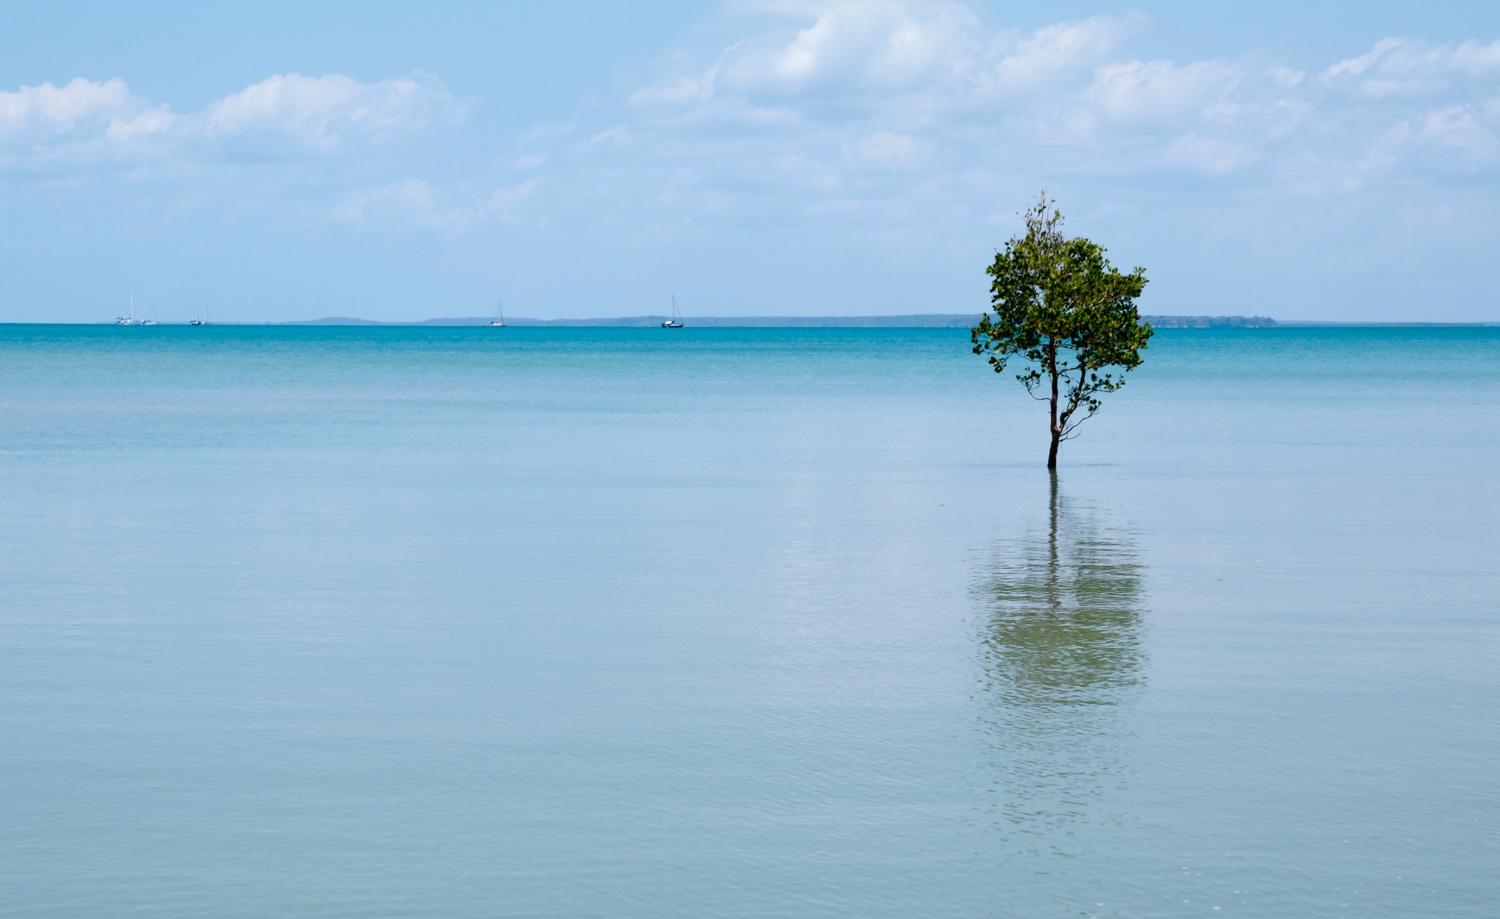 A Lonely Mangrove